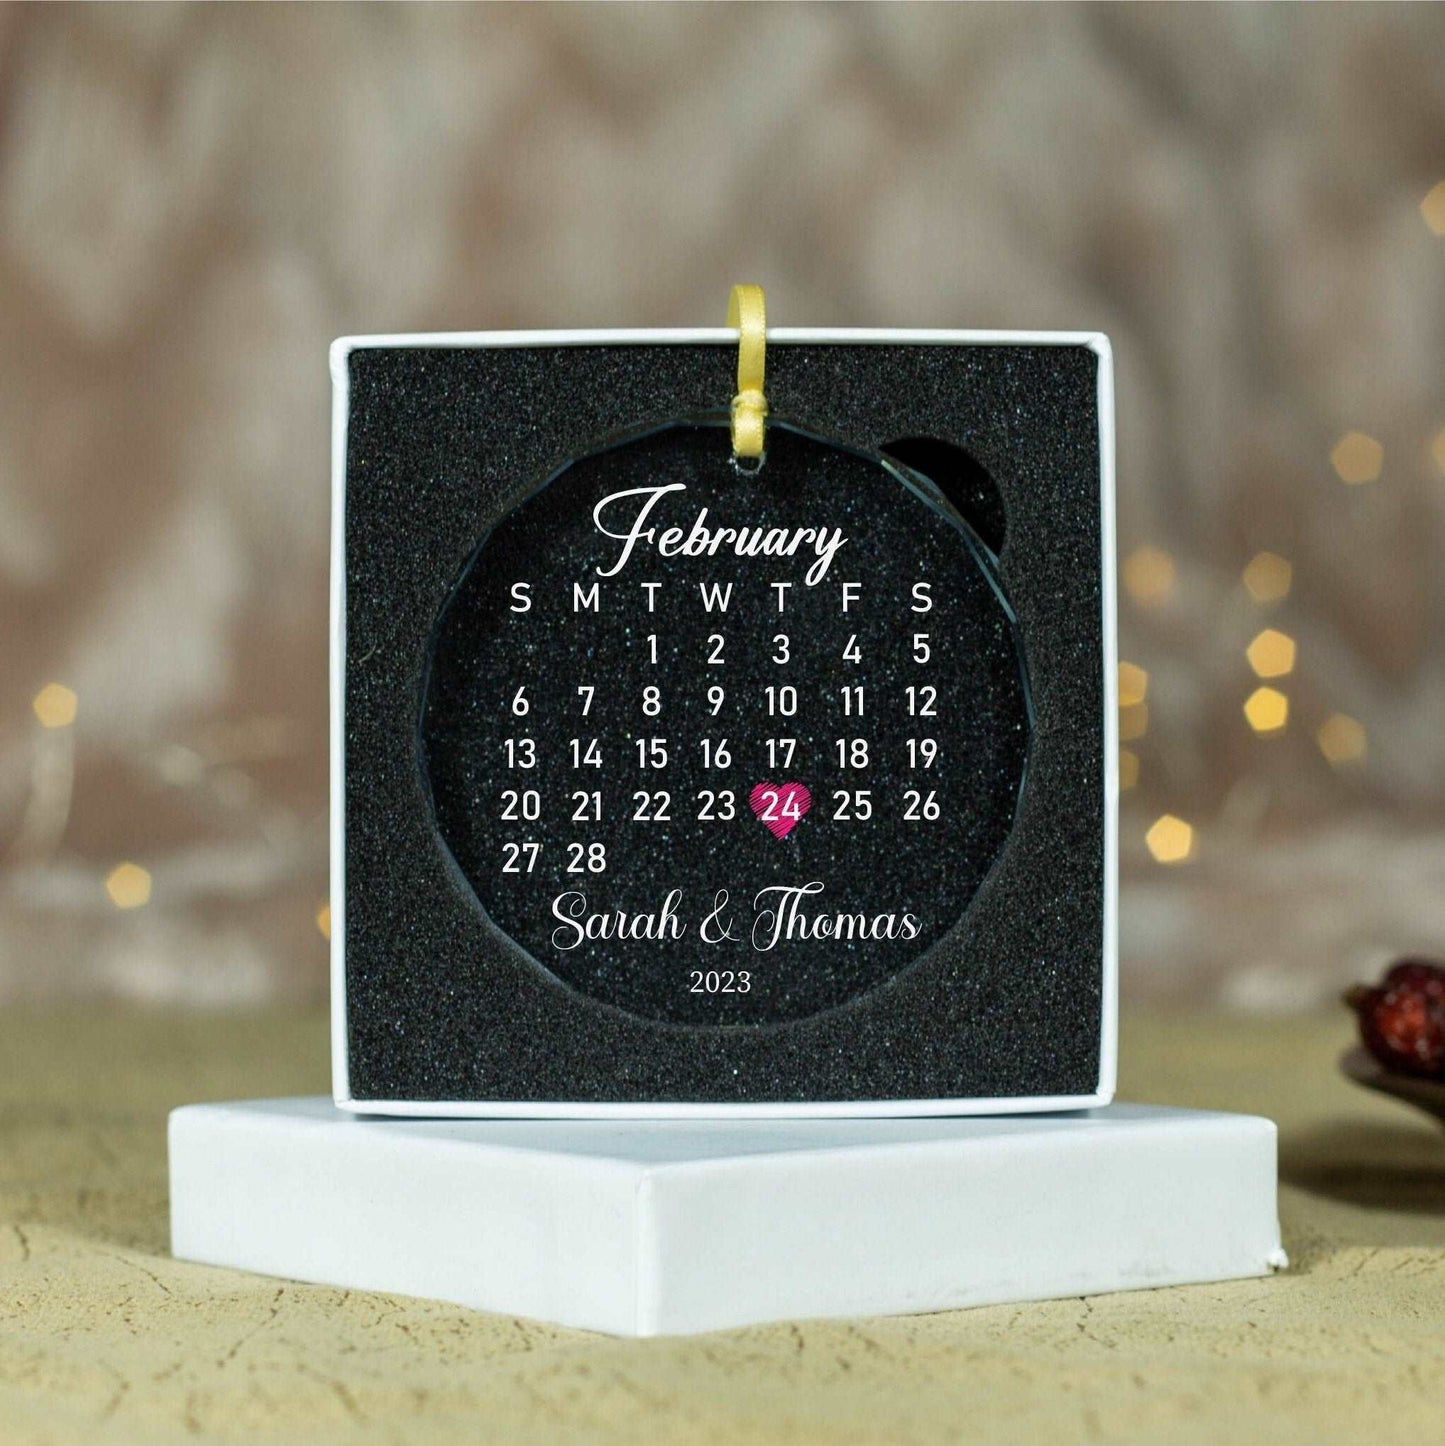 Personalized Calendar Ornament • Marriege Date Ornament • Wedding Date Ornament • Newlywed Gift • Engagement Gift 